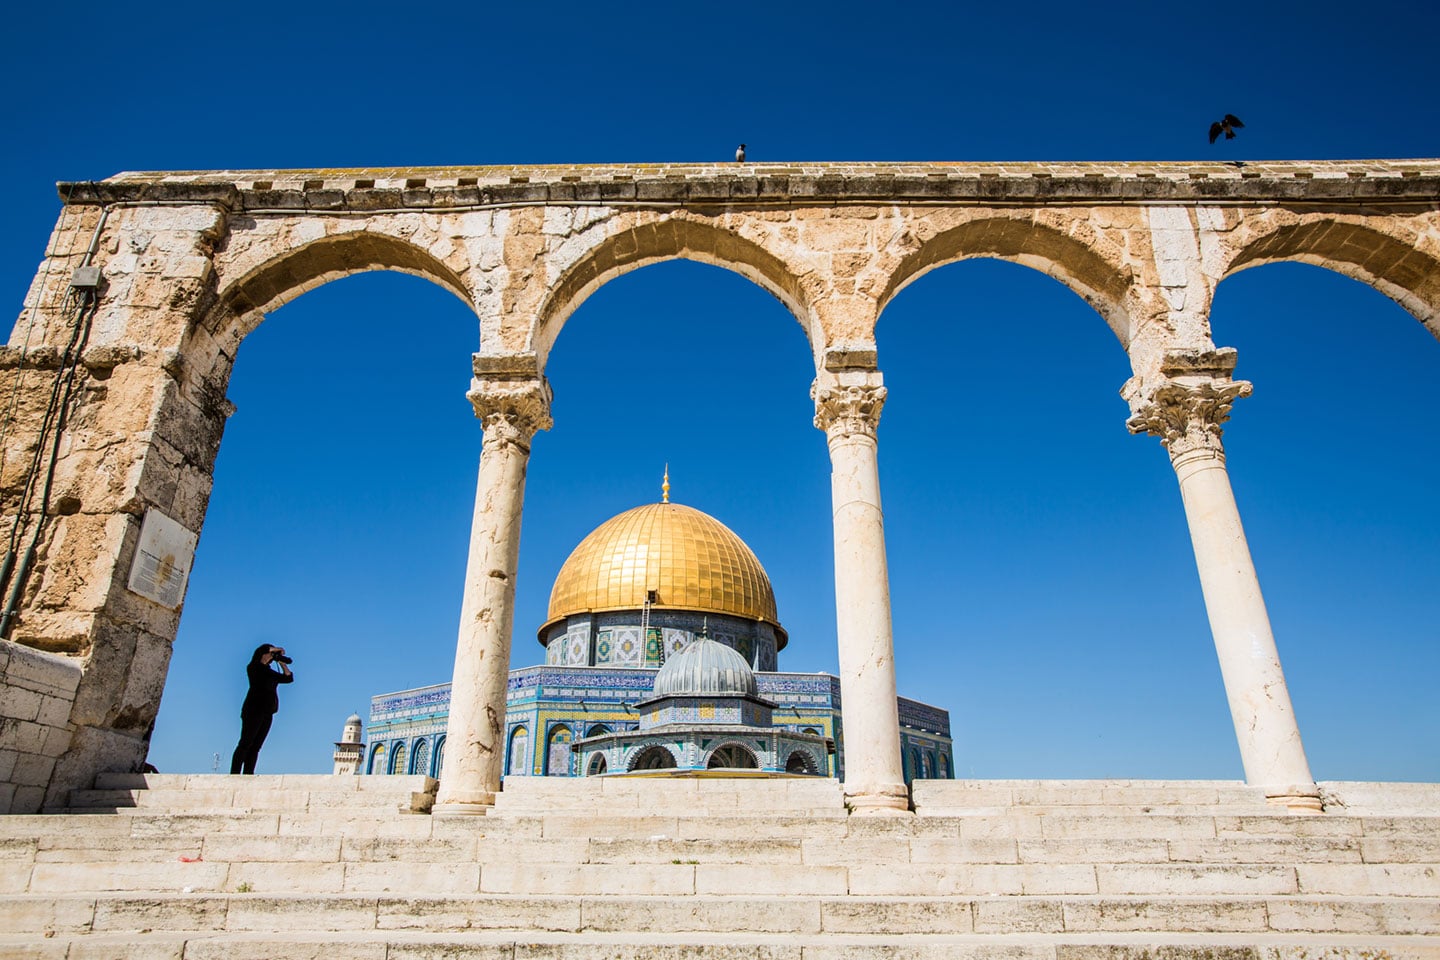 The Dome of the Rock in Jerusalem, Israel